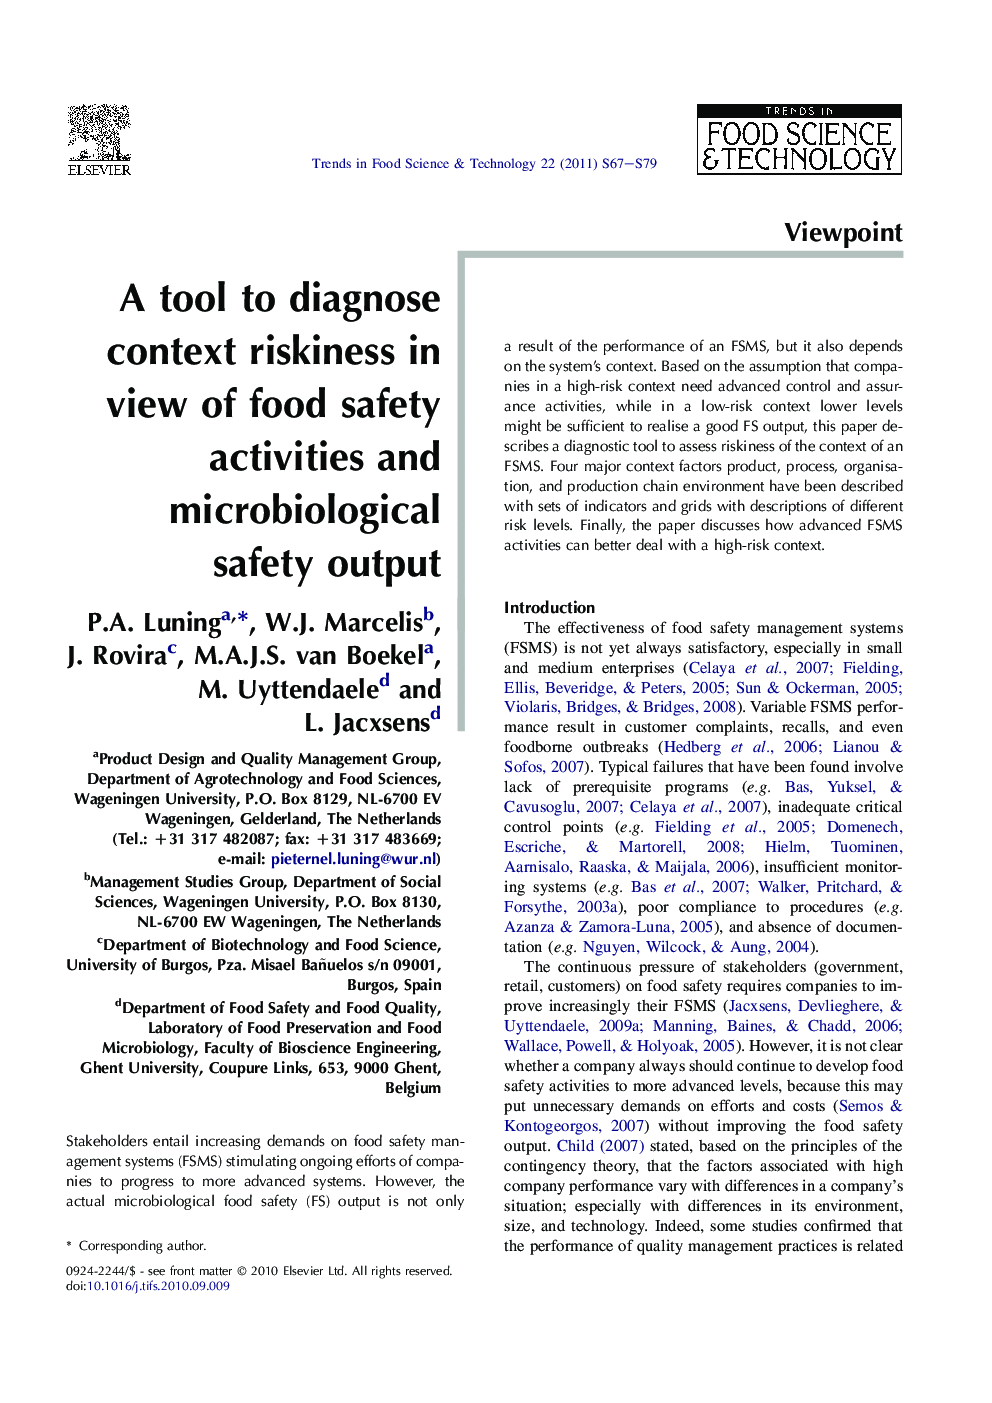 A tool to diagnose context riskiness in view of food safety activities and microbiological safety output